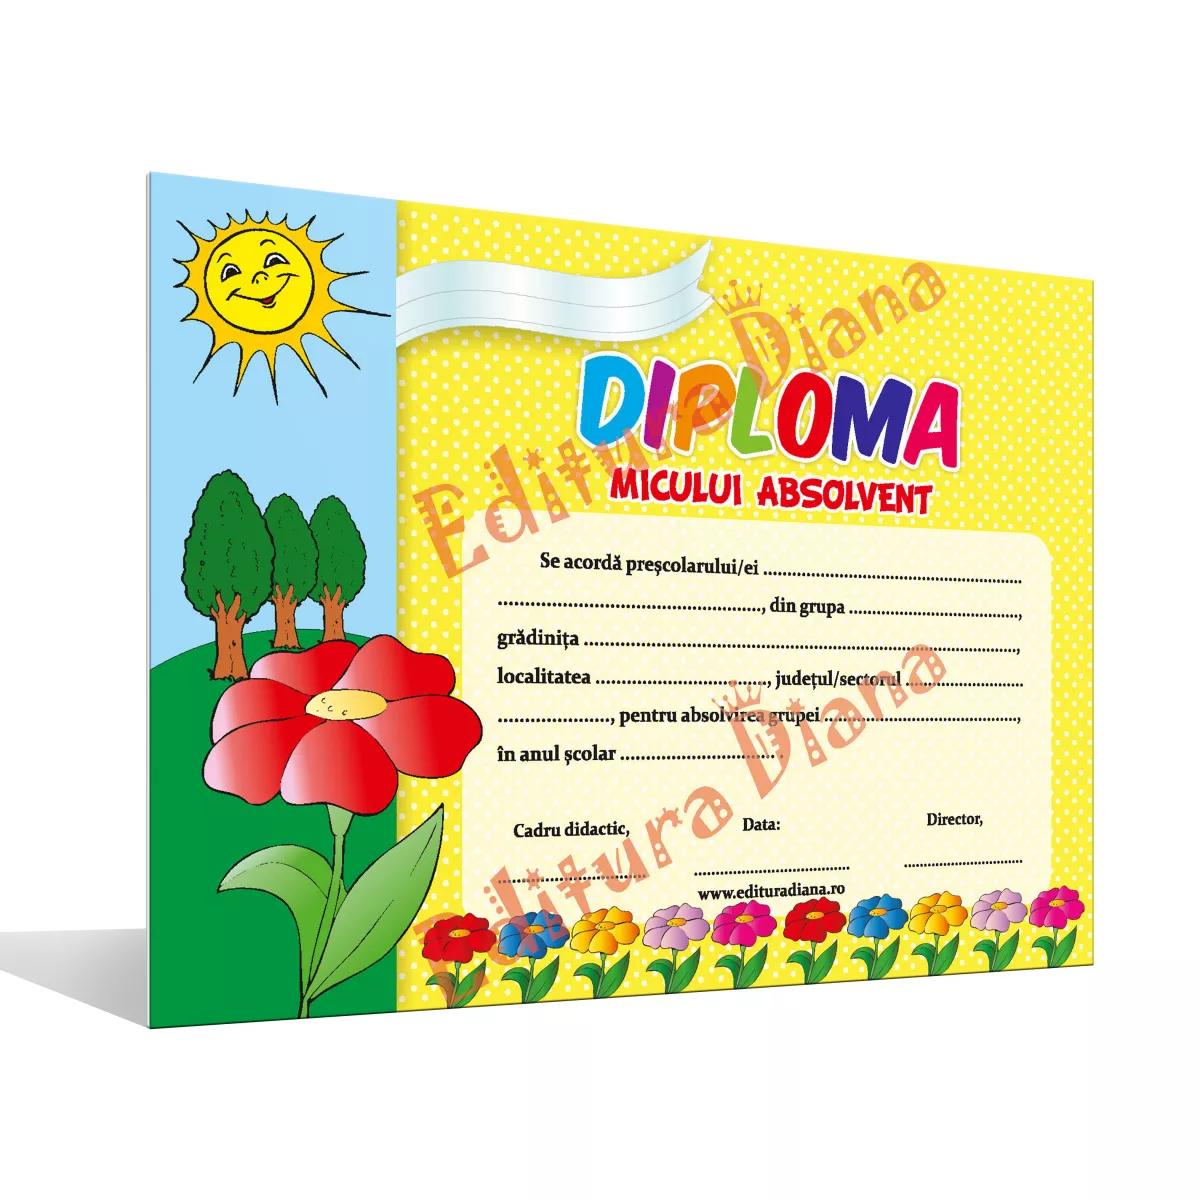 Diploma Micului Absolvent A4